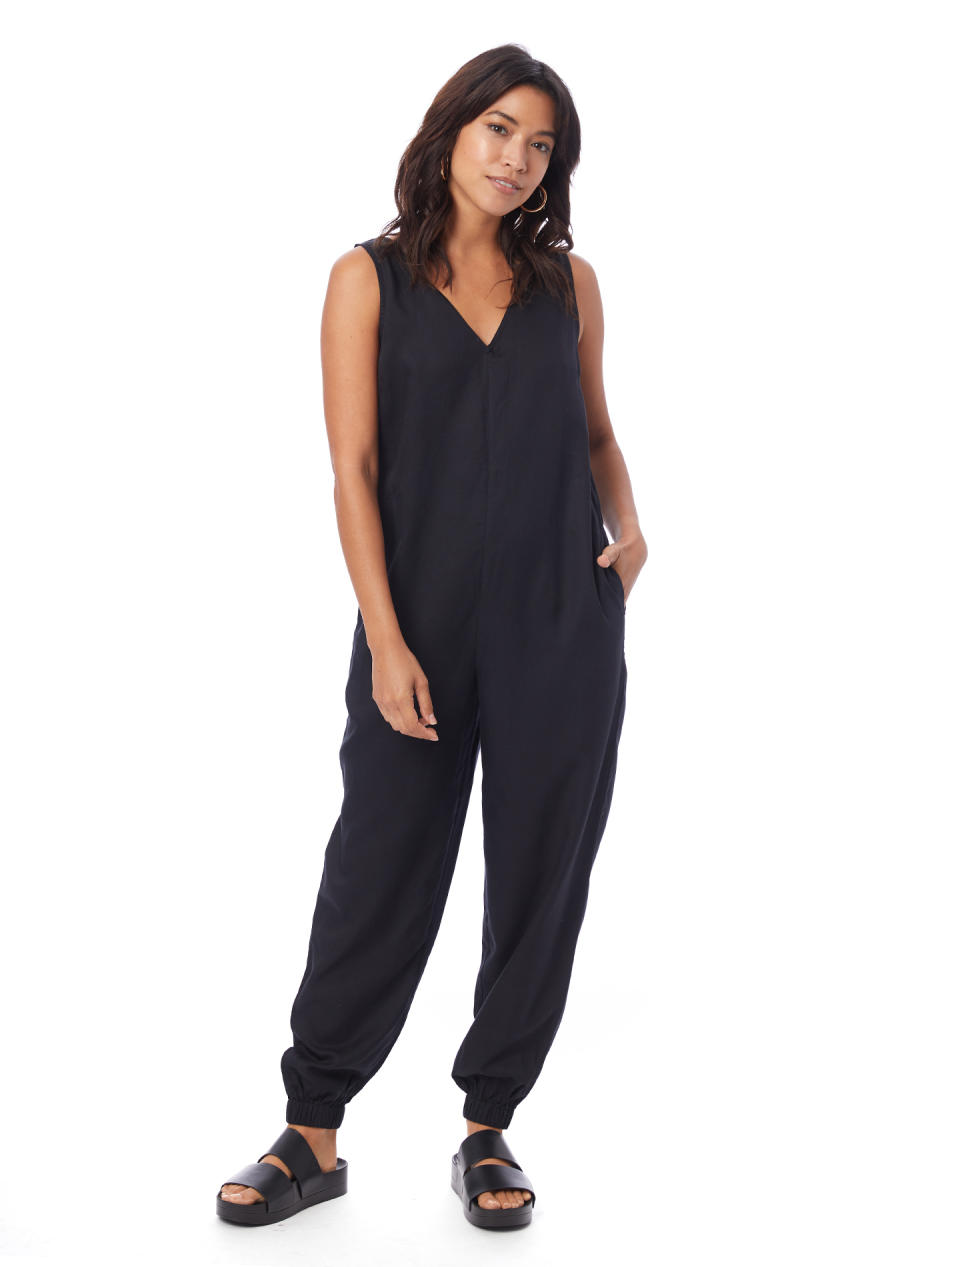 12) ABLE Charvee Relaxed Jumpsuit